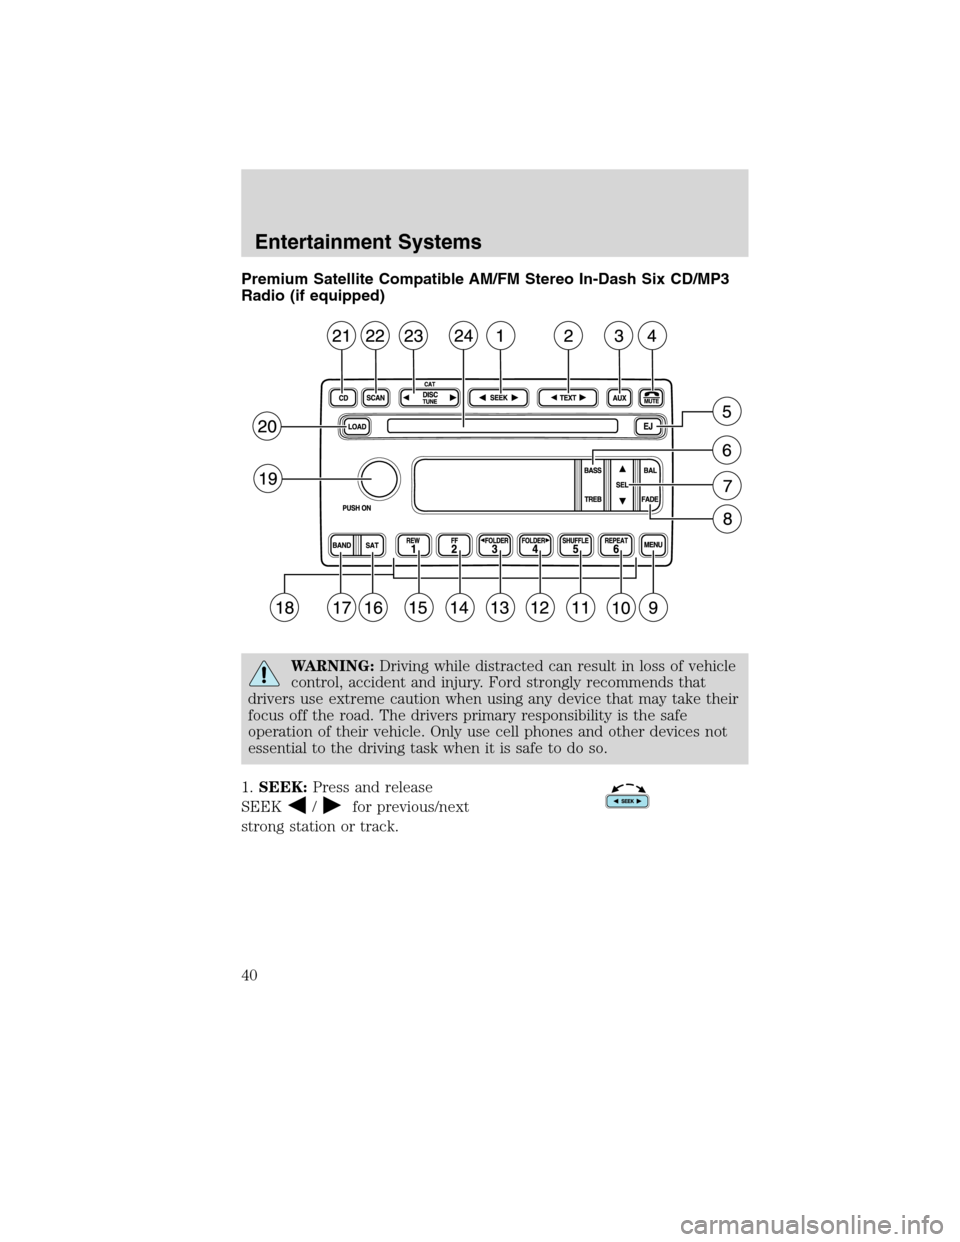 FORD F750 2010 12.G Owners Guide Premium Satellite Compatible AM/FM Stereo In-Dash Six CD/MP3
Radio (if equipped)
WARNING:Driving while distracted can result in loss of vehicle
control, accident and injury. Ford strongly recommends t